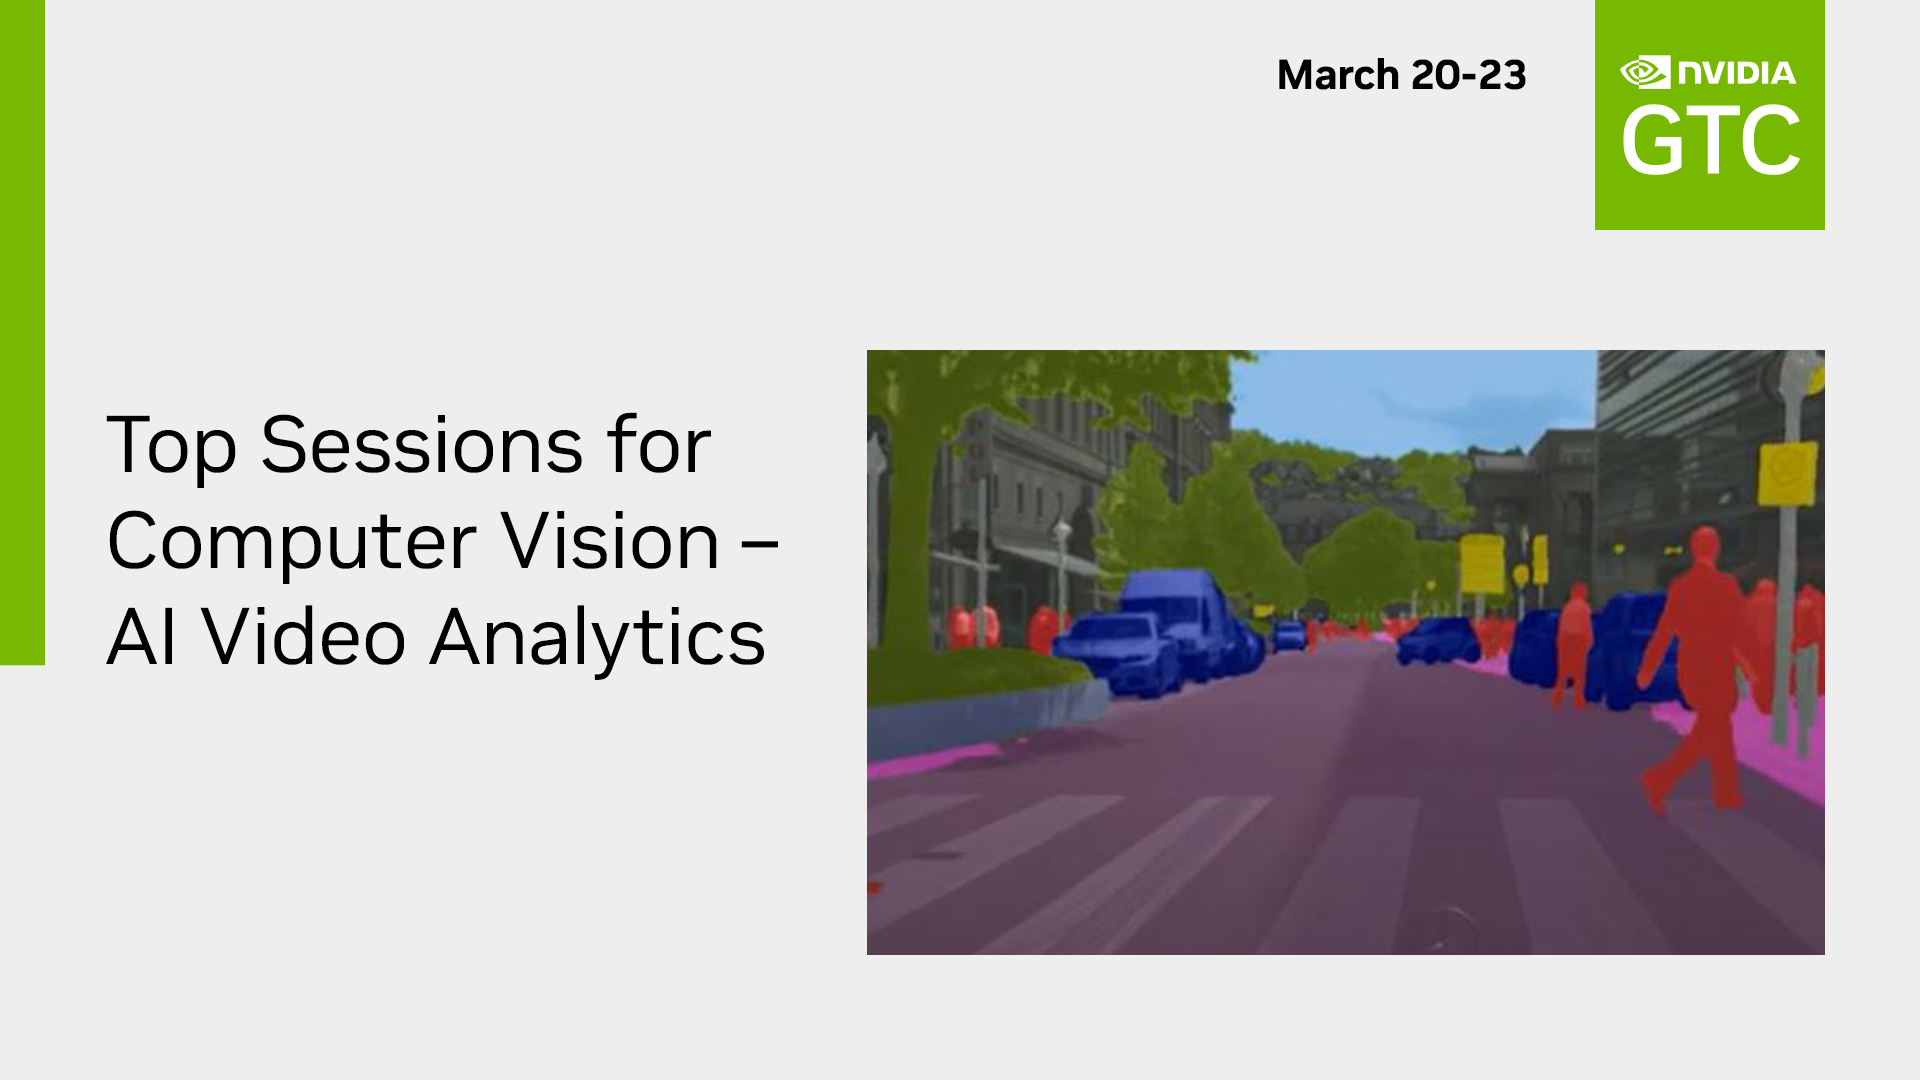 Promo graphic for GTC showing a city street with cars, people, crosswalk, and road signs with computer vision detection overlays in different colors.